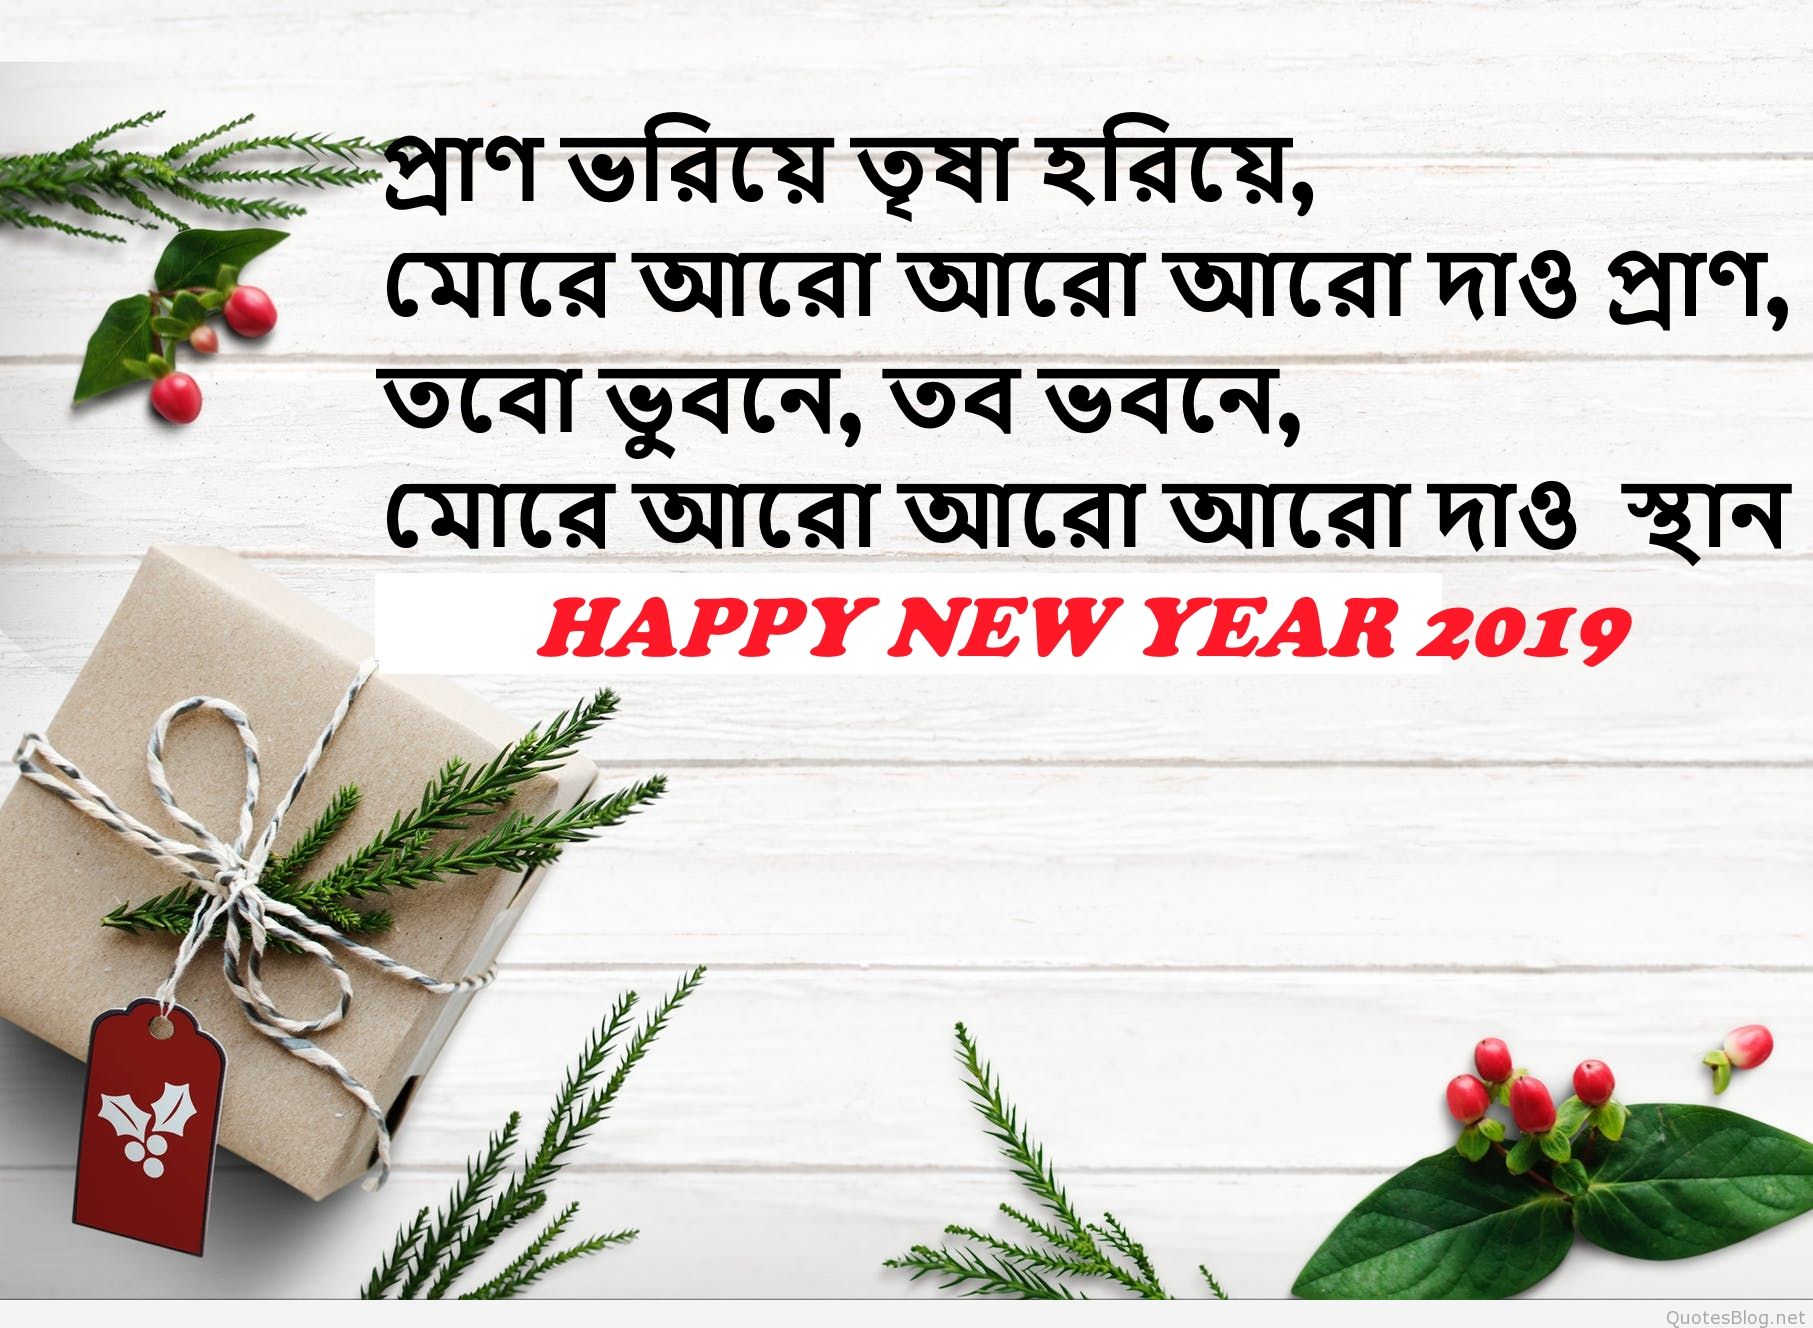 Bangla Happy New Year Sms - Happy New Year Video 2019 - HD Wallpaper 